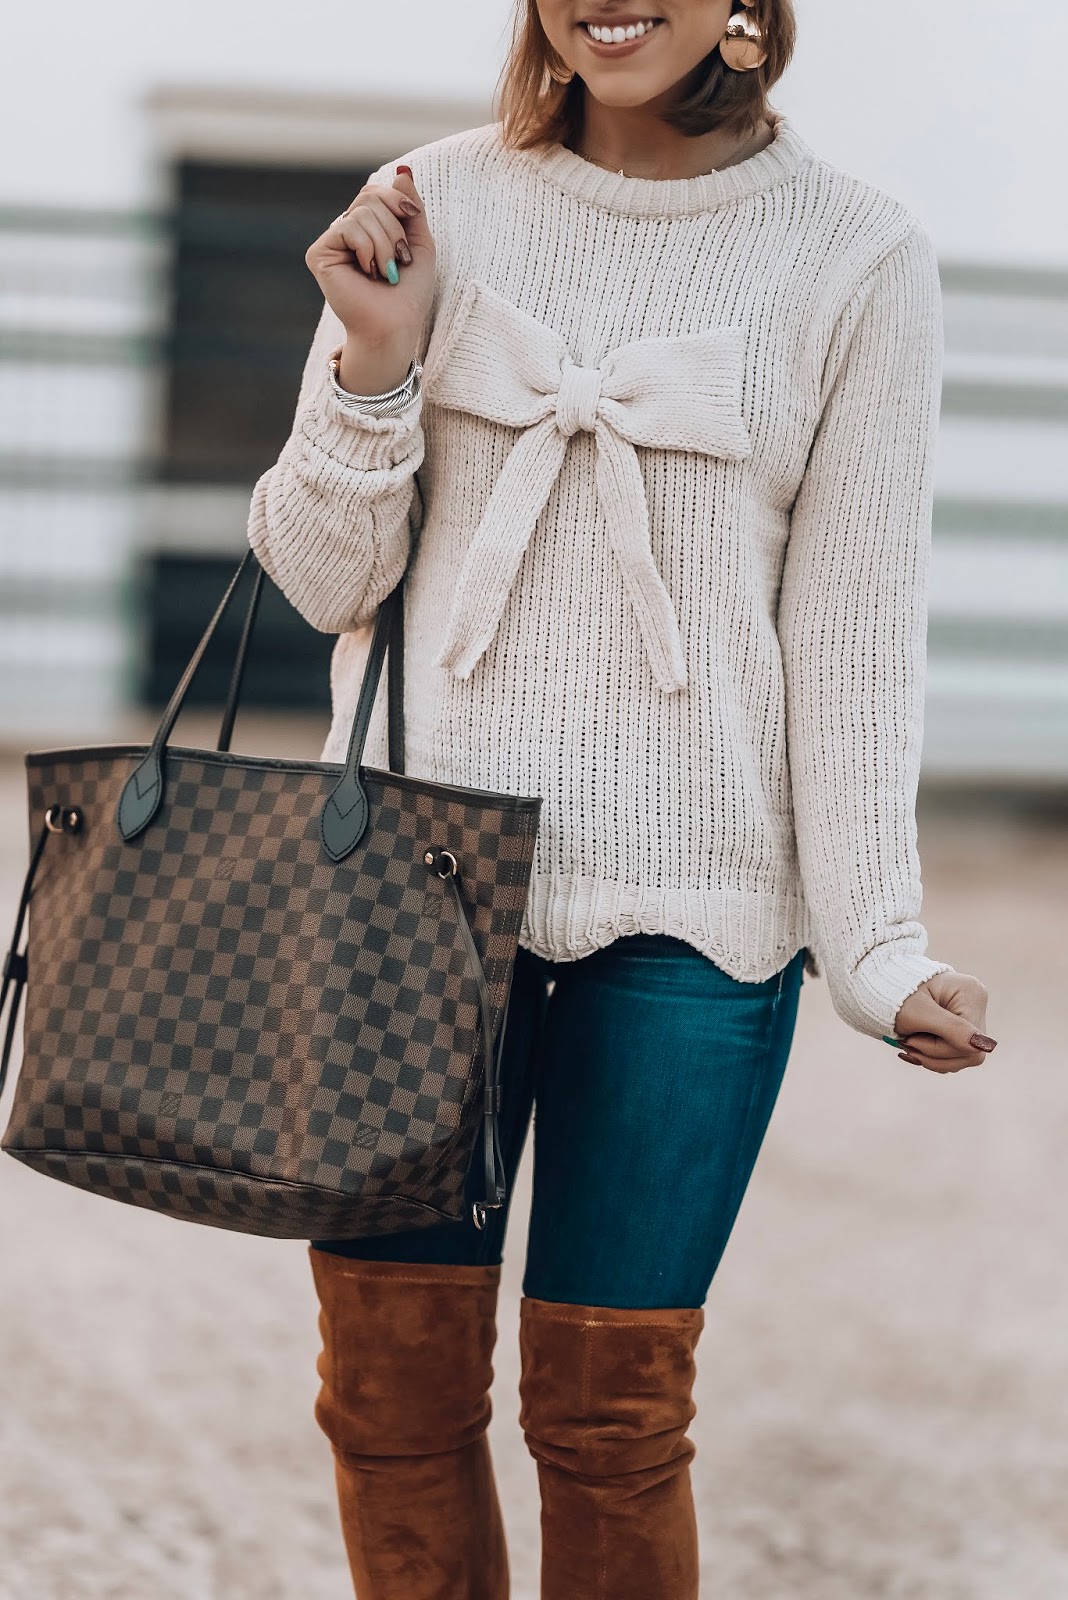 Scallop, Chenille Bow Sweater + 2019 Goals - Something Delightful Blog